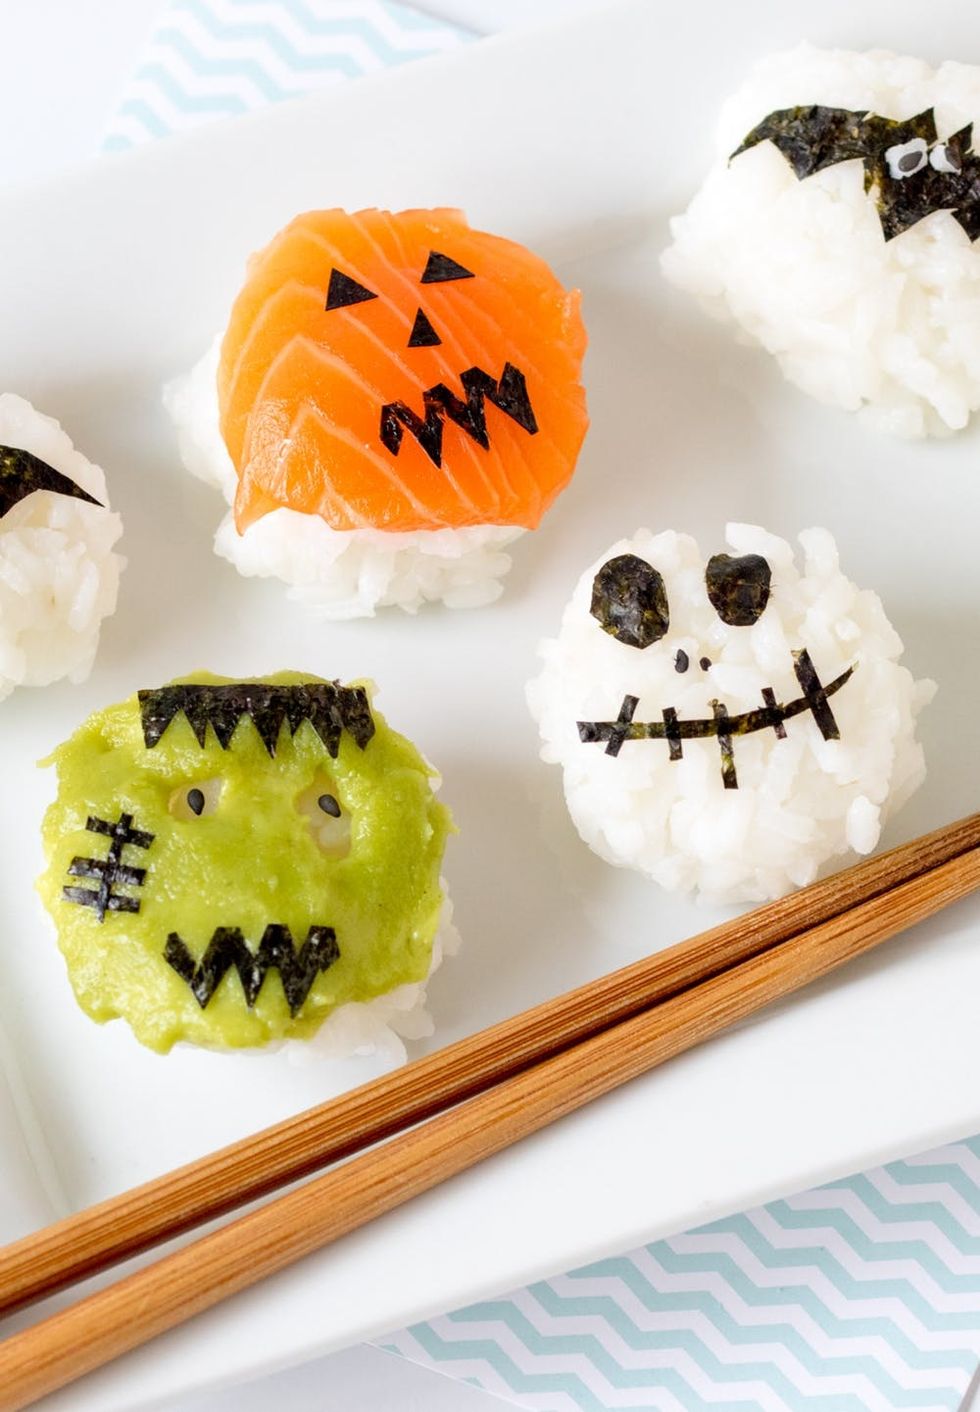 This Monster Sushi Will Make Your Halloween Party Spooktacular - Brit + Co